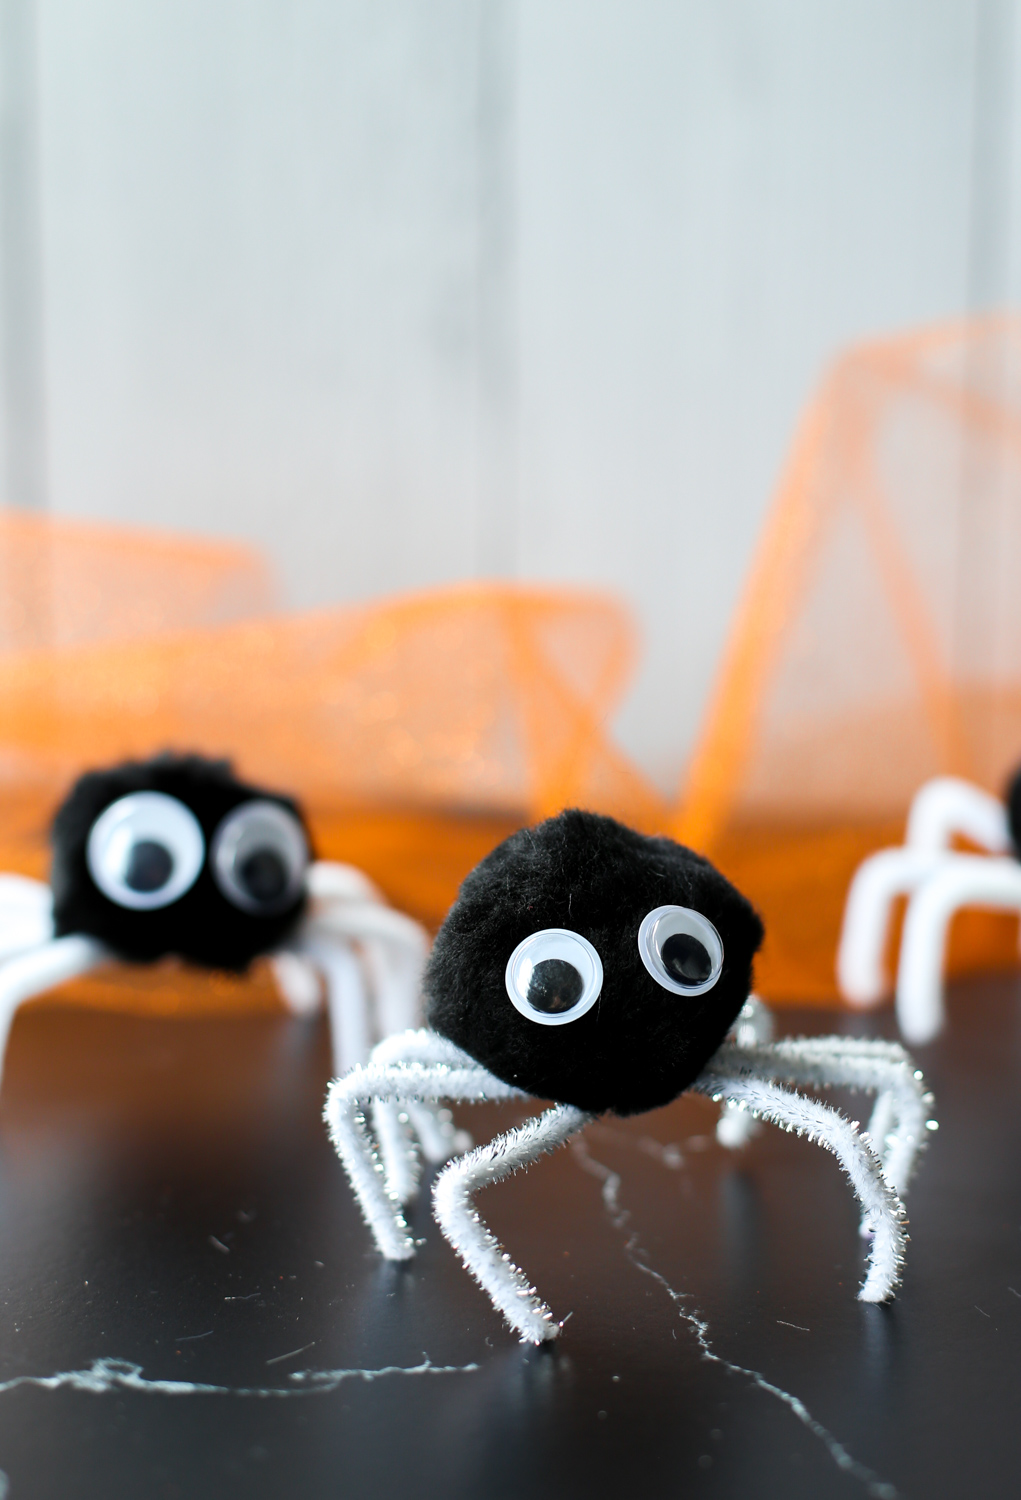 Pipe cleaner spider craft - black pom poms glued atop white pipe cleaner legs bent to look like spider legs and googly eyes as well.